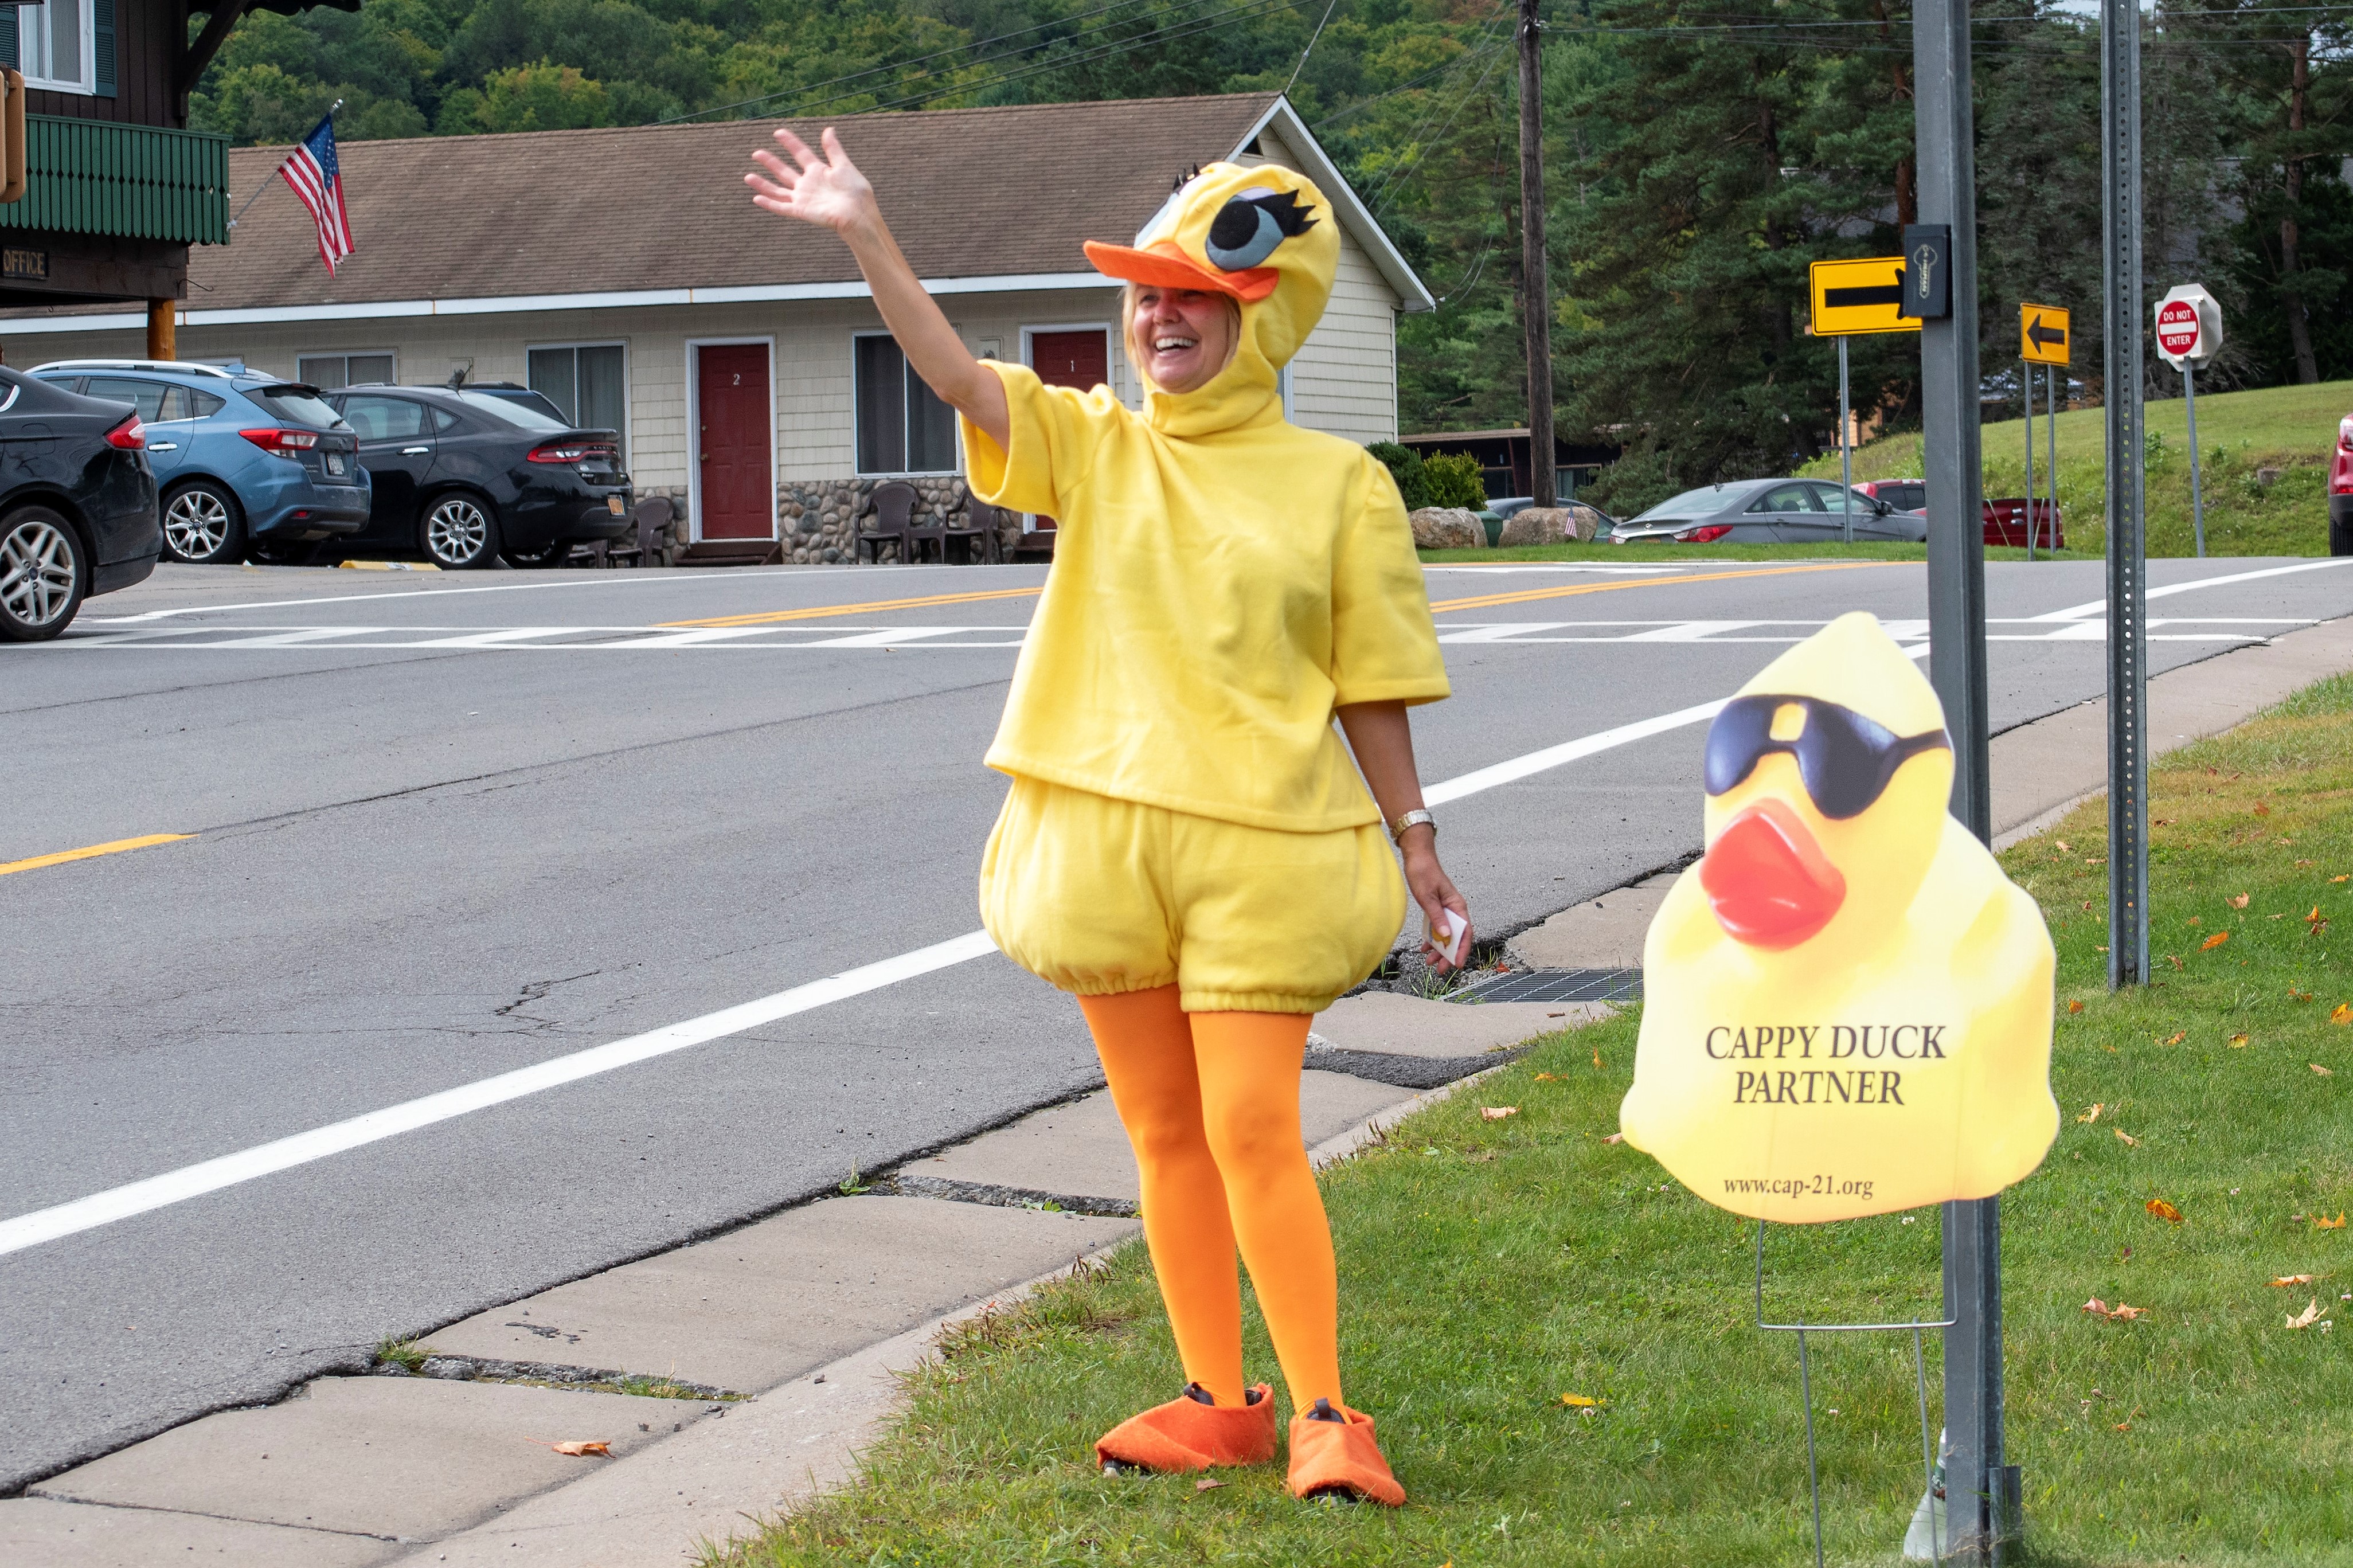 Annual CAP-PY Duck Derby; Race Time 12:30 PM